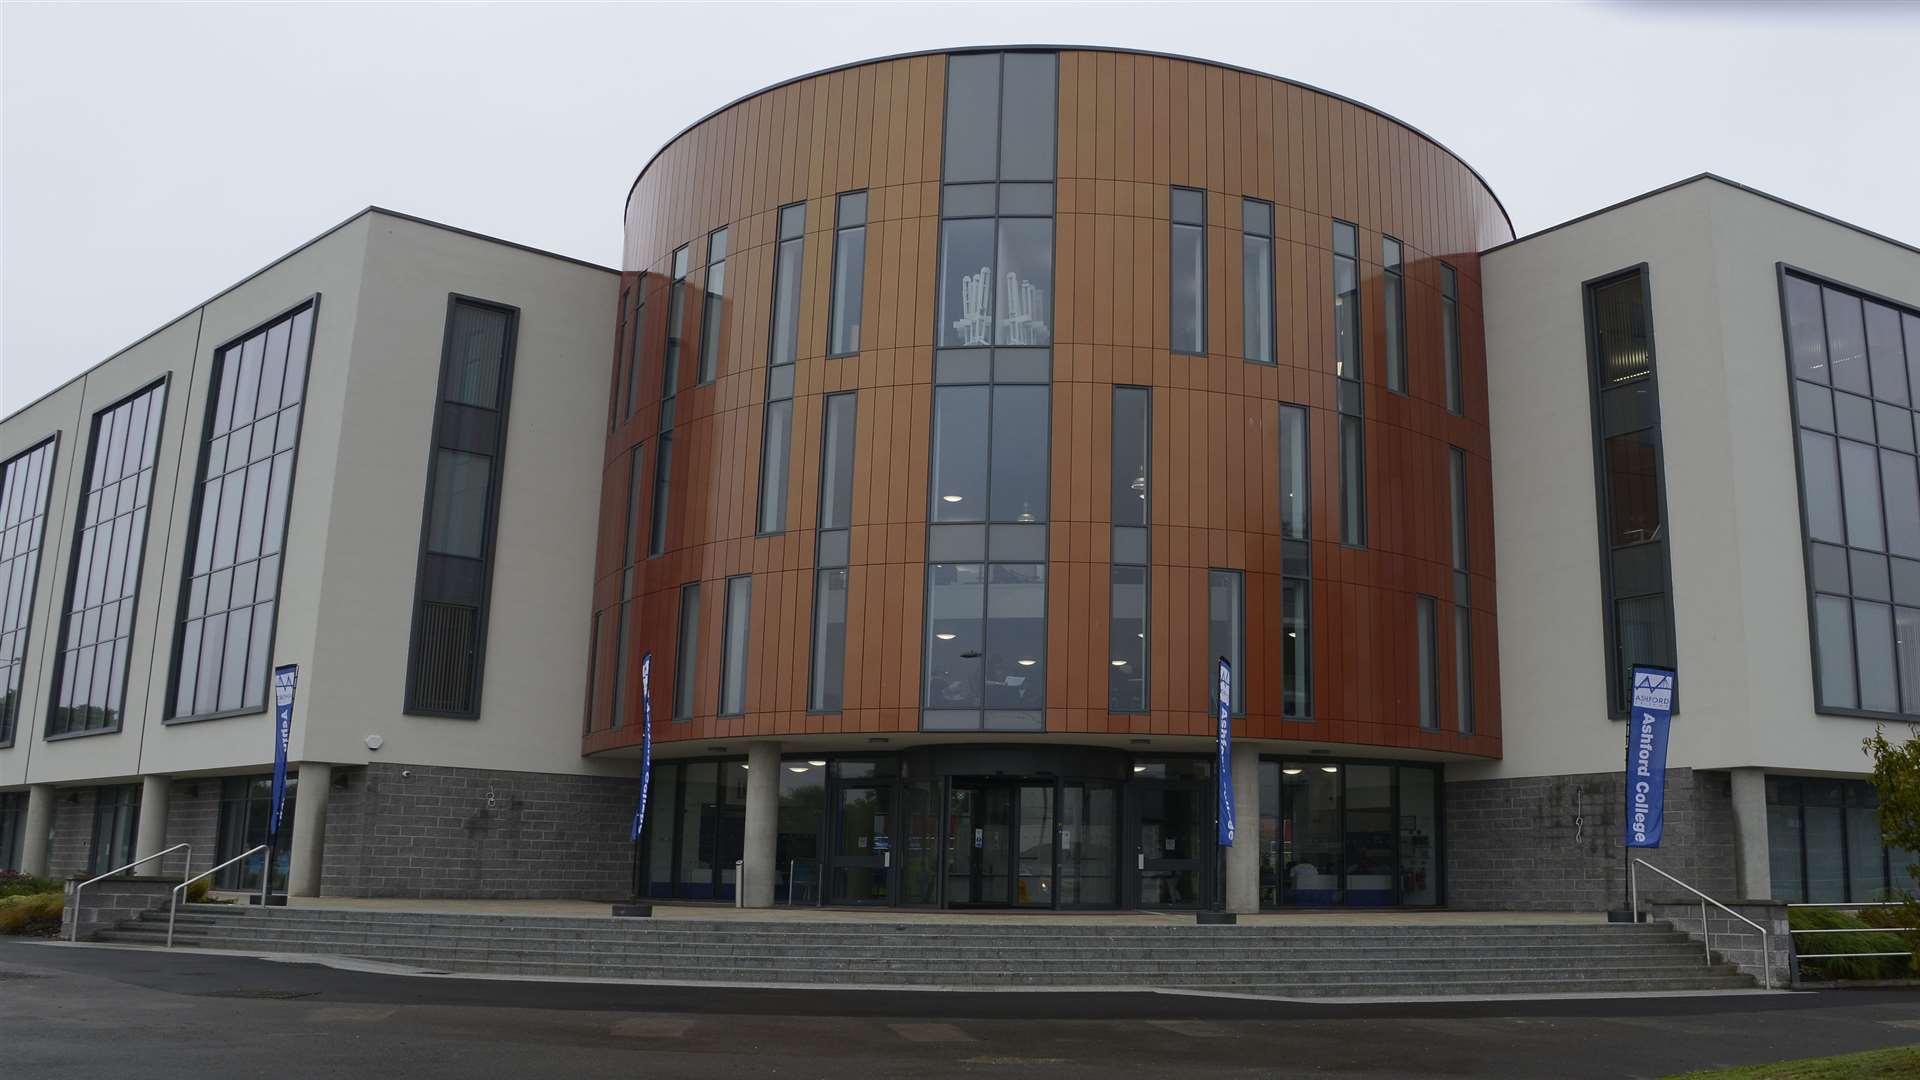 The new Ashford College has opened